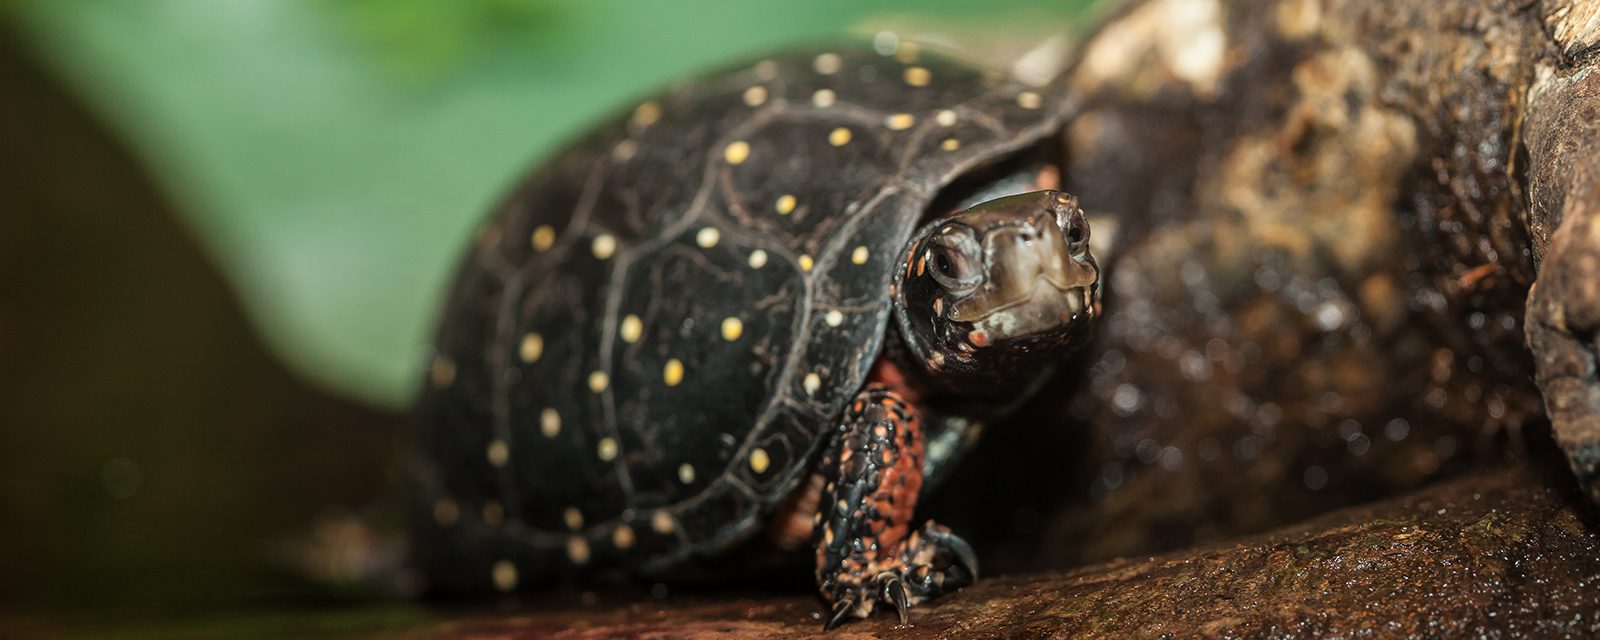 Spotted turtle in exhibit